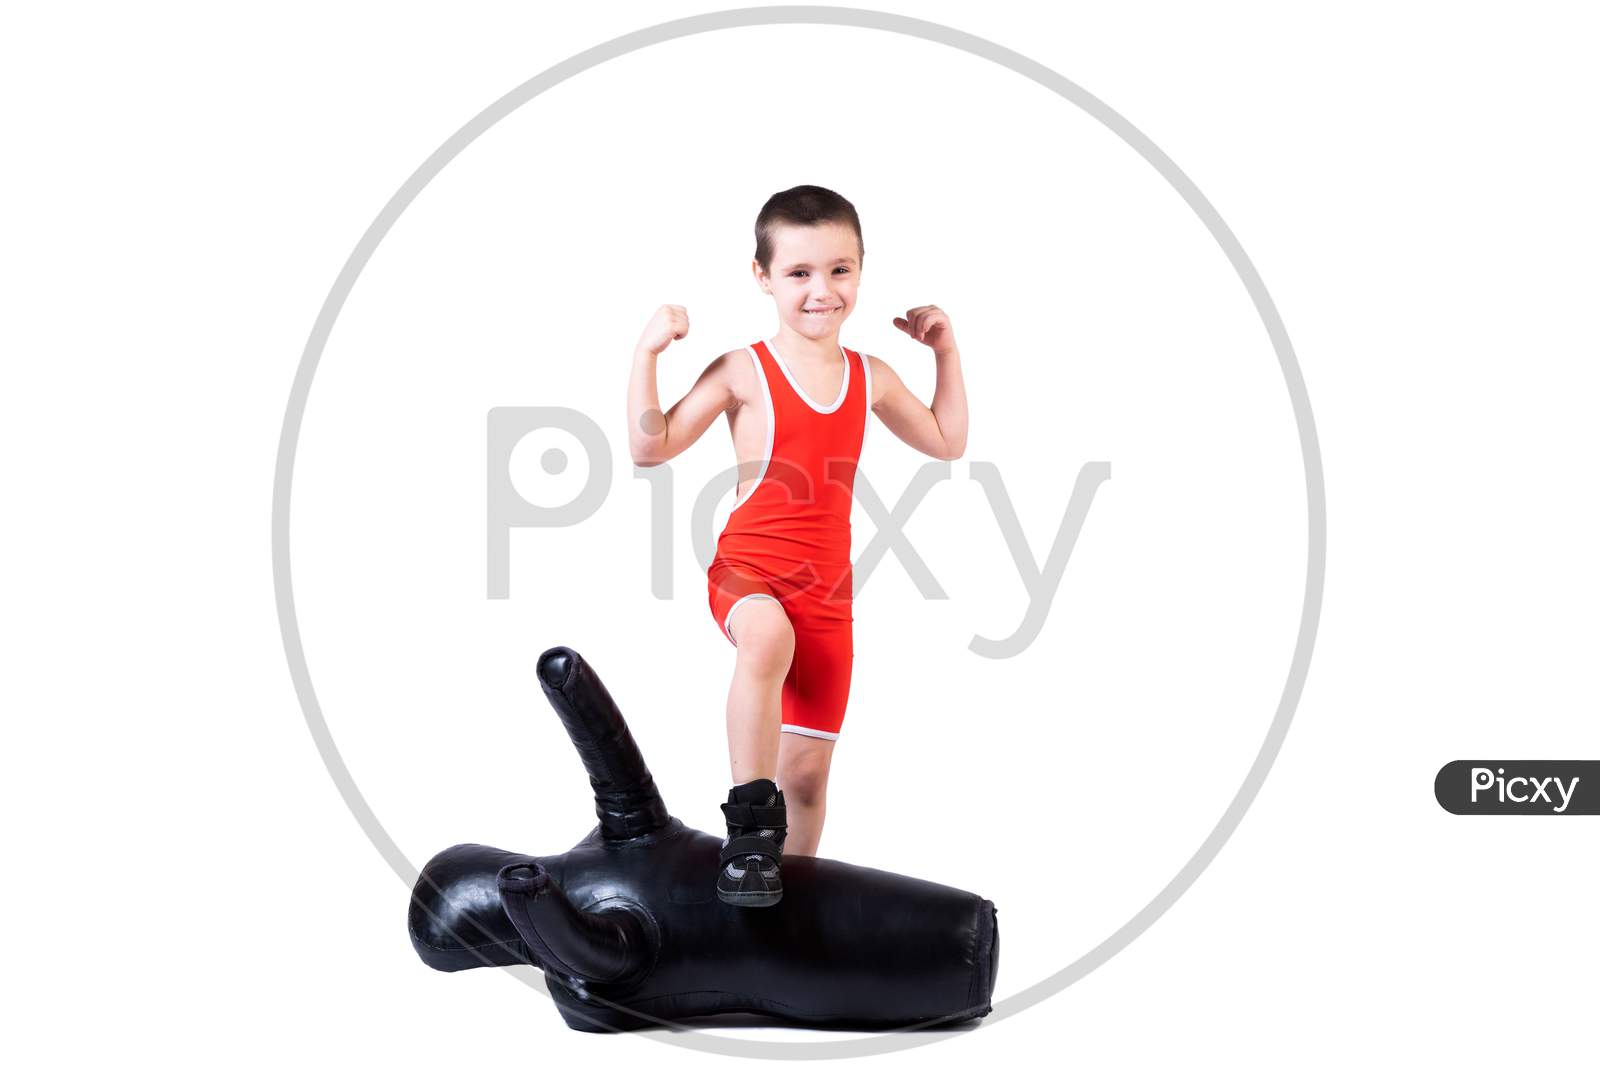 Cheerful Sports Boy In Wrestling Tights And Wrestling Shows Biceps, Rejoices In Victory, Stands Over A Defeated Sports Dummy For Training And Handling Techniques From Various Martial Arts On A Fir-Tree Isolated Background.